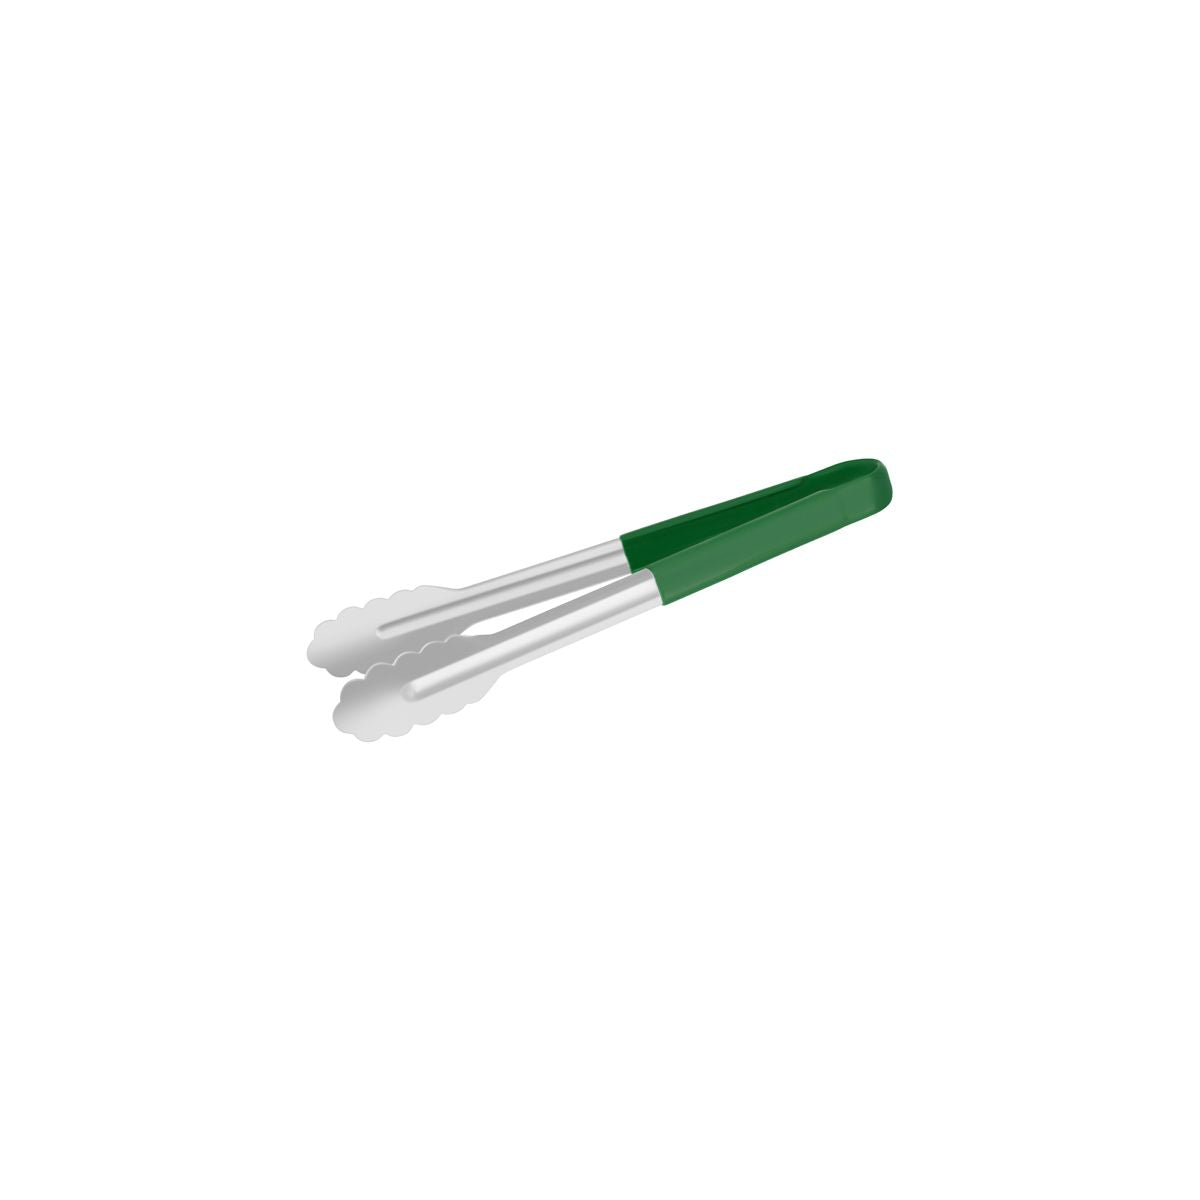 Utility Tong - 300mm, Green: Pack of 1